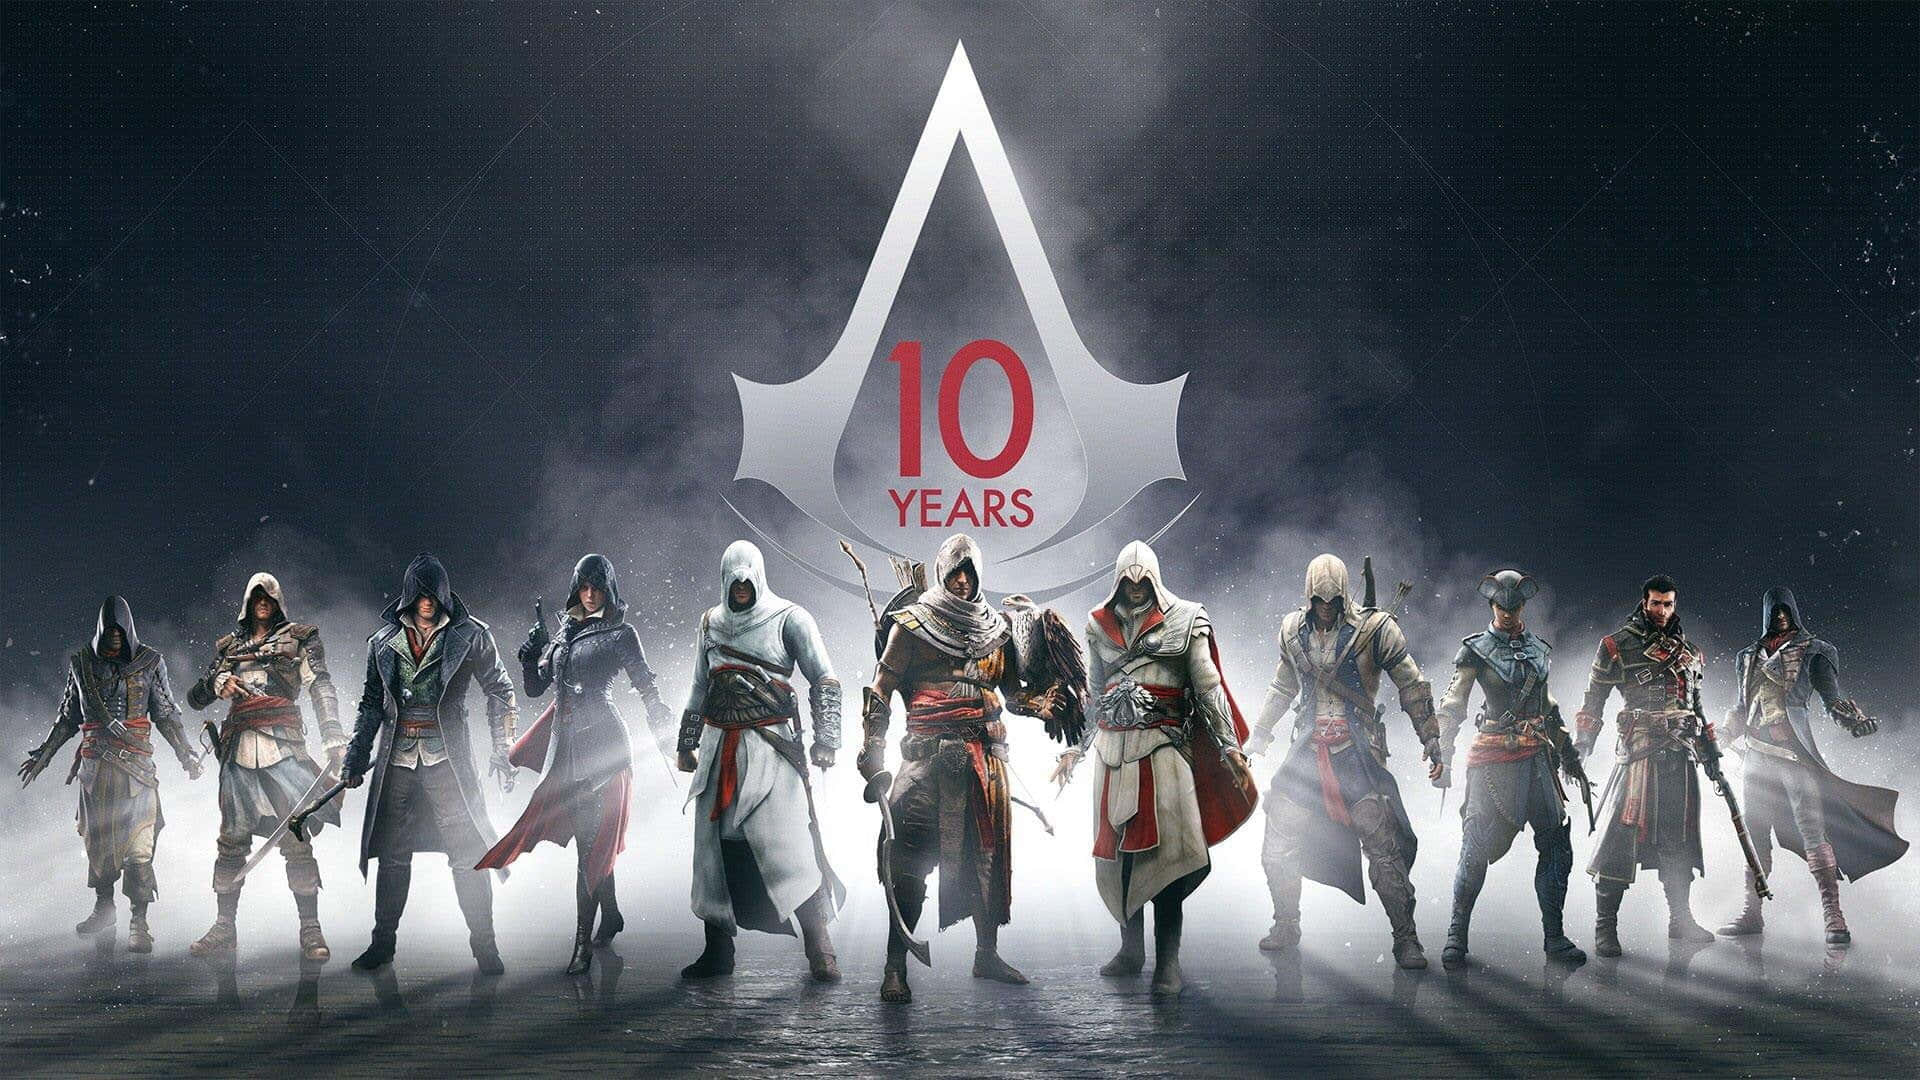 Assassin's Creed Characters in Action Wallpaper